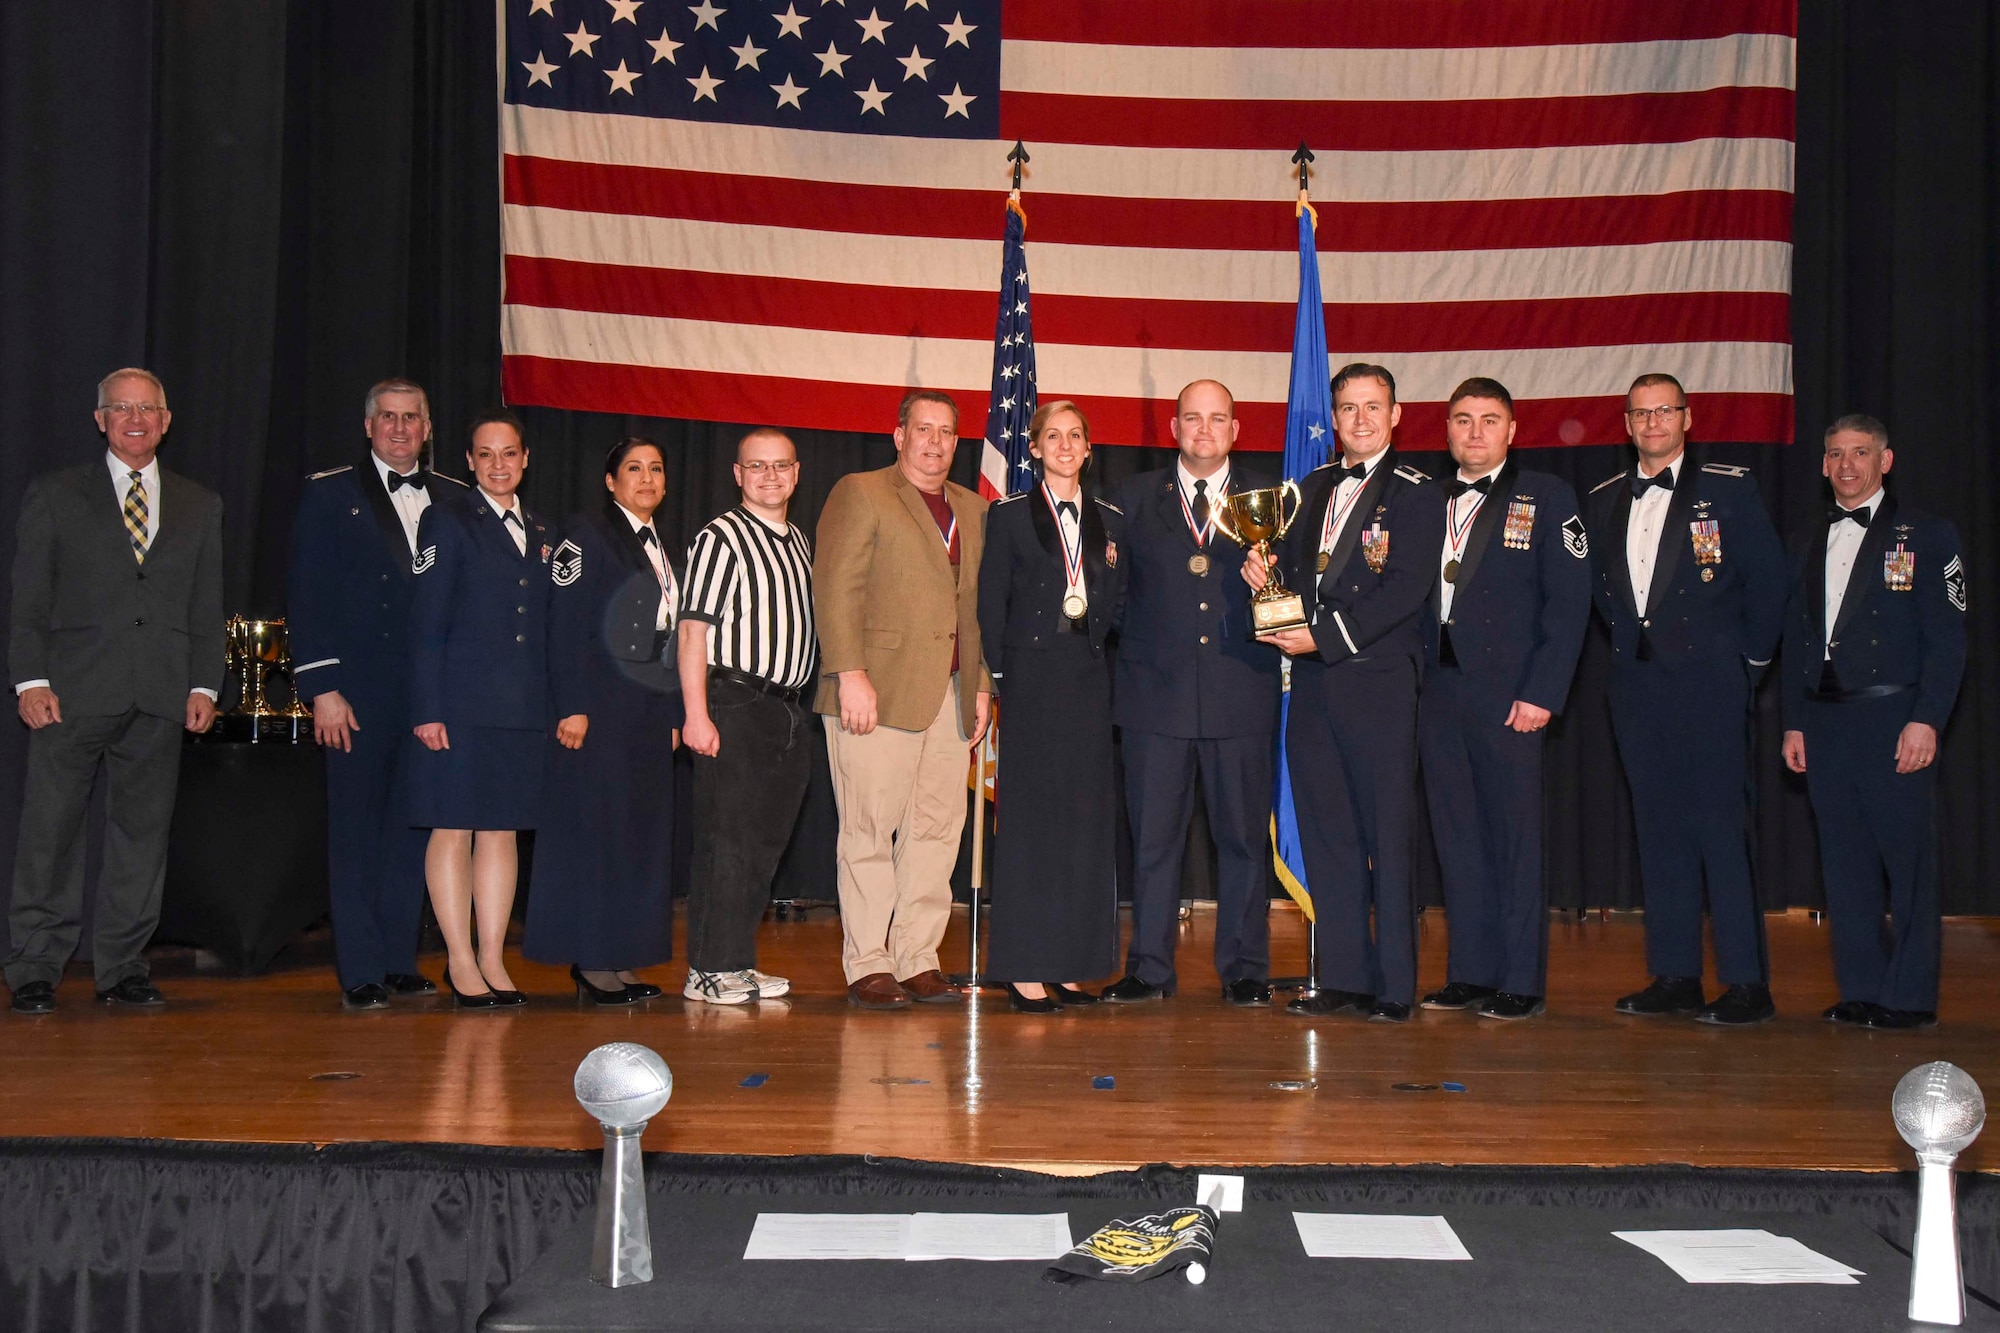 Wing Plans and Programs and Command Post, 22nd Wing Staff Agencies, accepts the 2016 Team of the Year award, Feb. 3, 2017, at McConnell Air Force Base, Kan. The annual awards ceremony recognized military and civilian members who excel in their areas of responsibilities, leadership qualities, community involvement, self-improvement and innovation from January to December 2016. (U.S. Air Force photo/Senior Airman Christopher Thornbury)